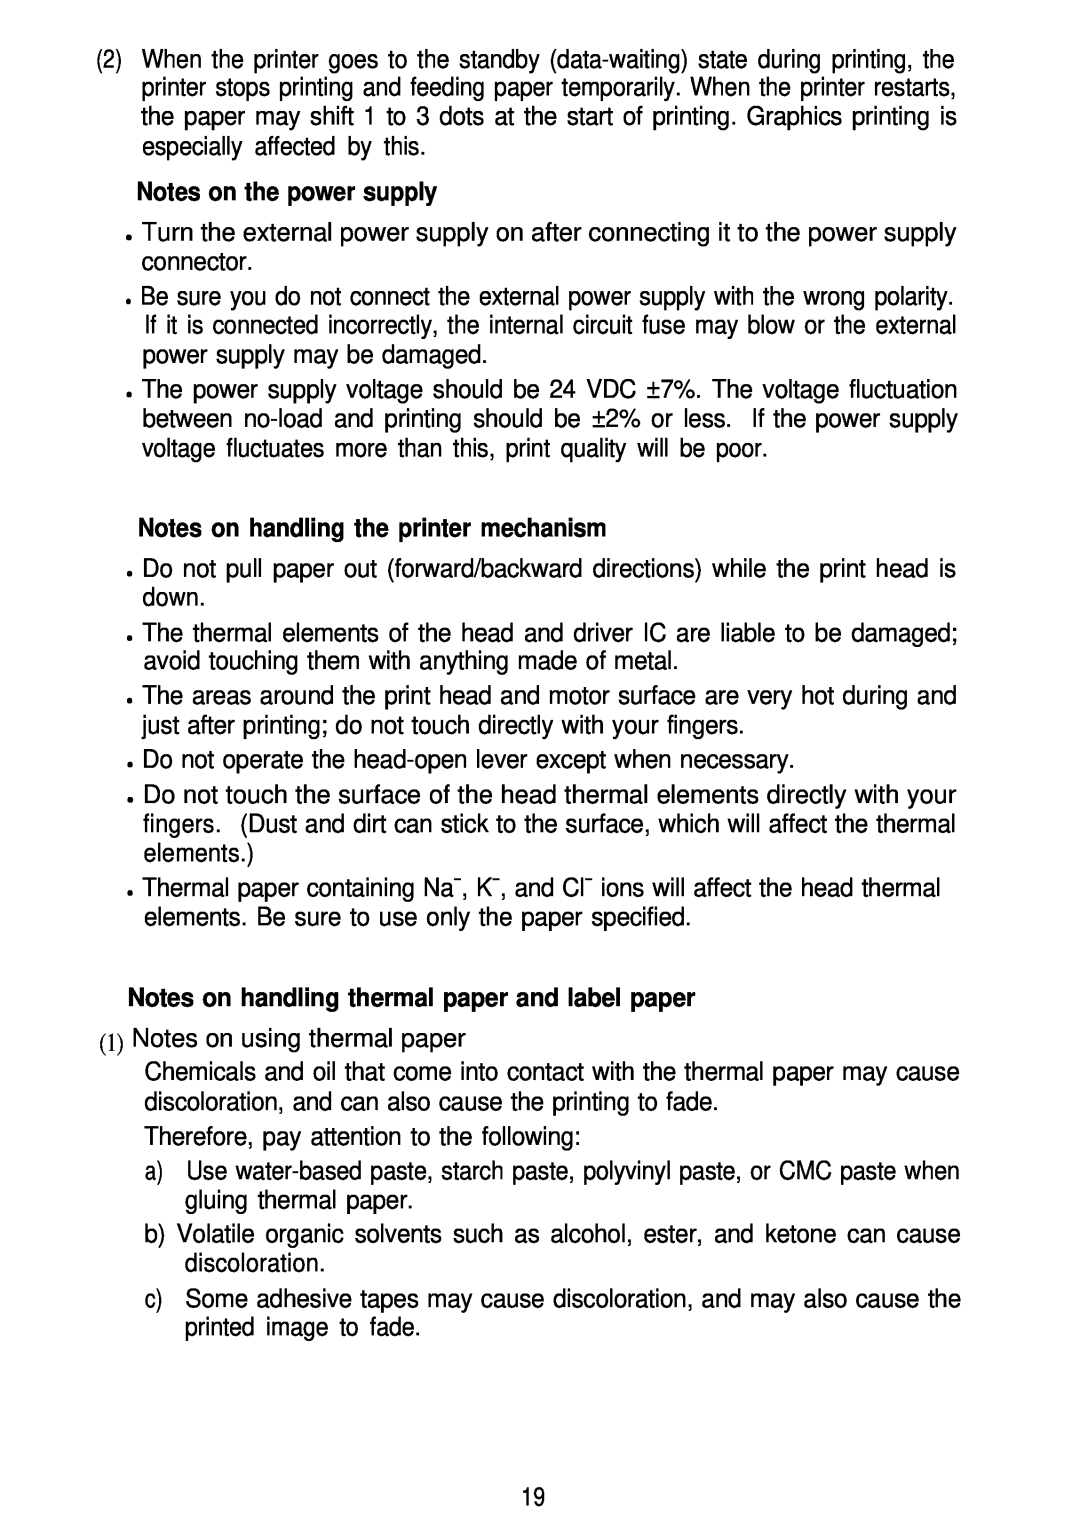 Seiko Group TM-L60 manual n Notes on the power supply, n Notes on handling the printer mechanism 